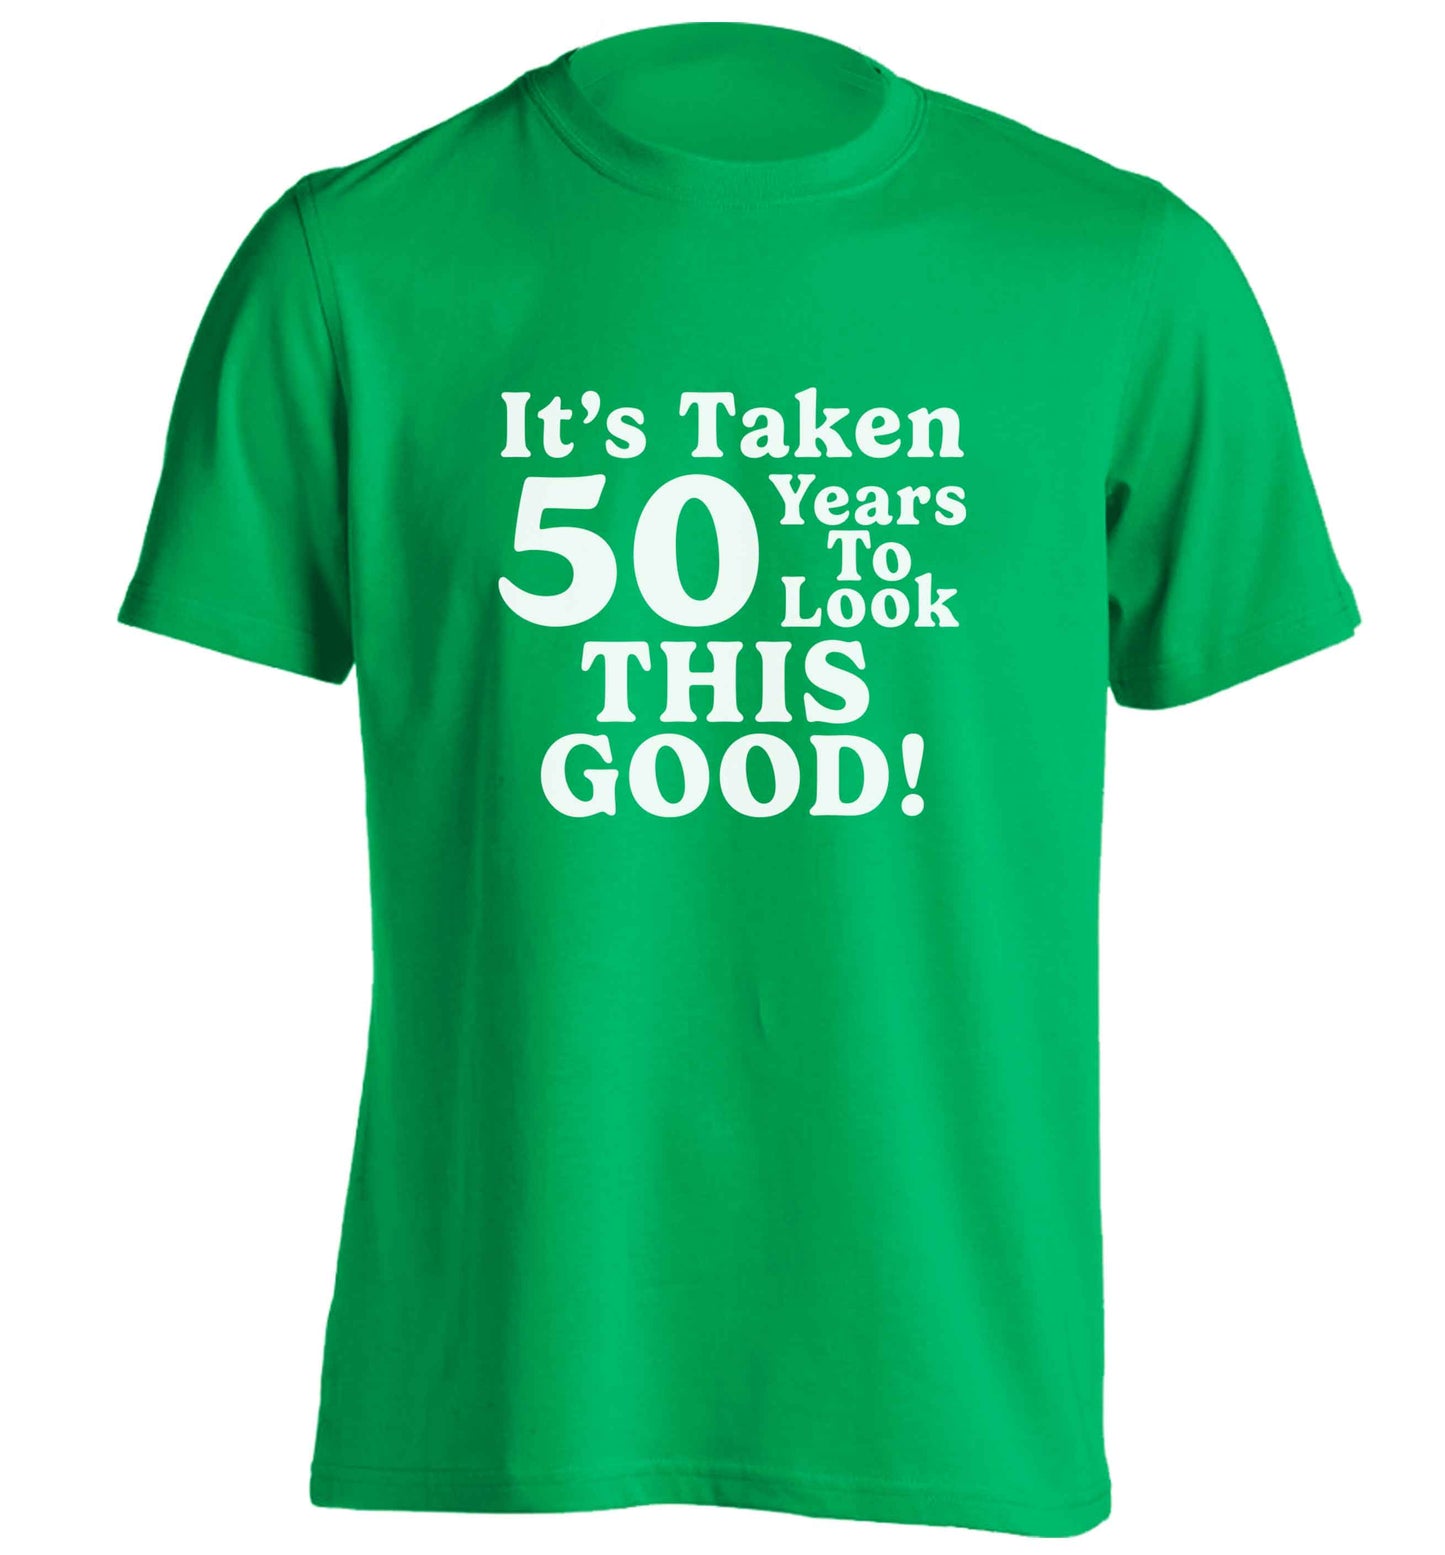 It's taken 50 years to look this good! adults unisex green Tshirt 2XL